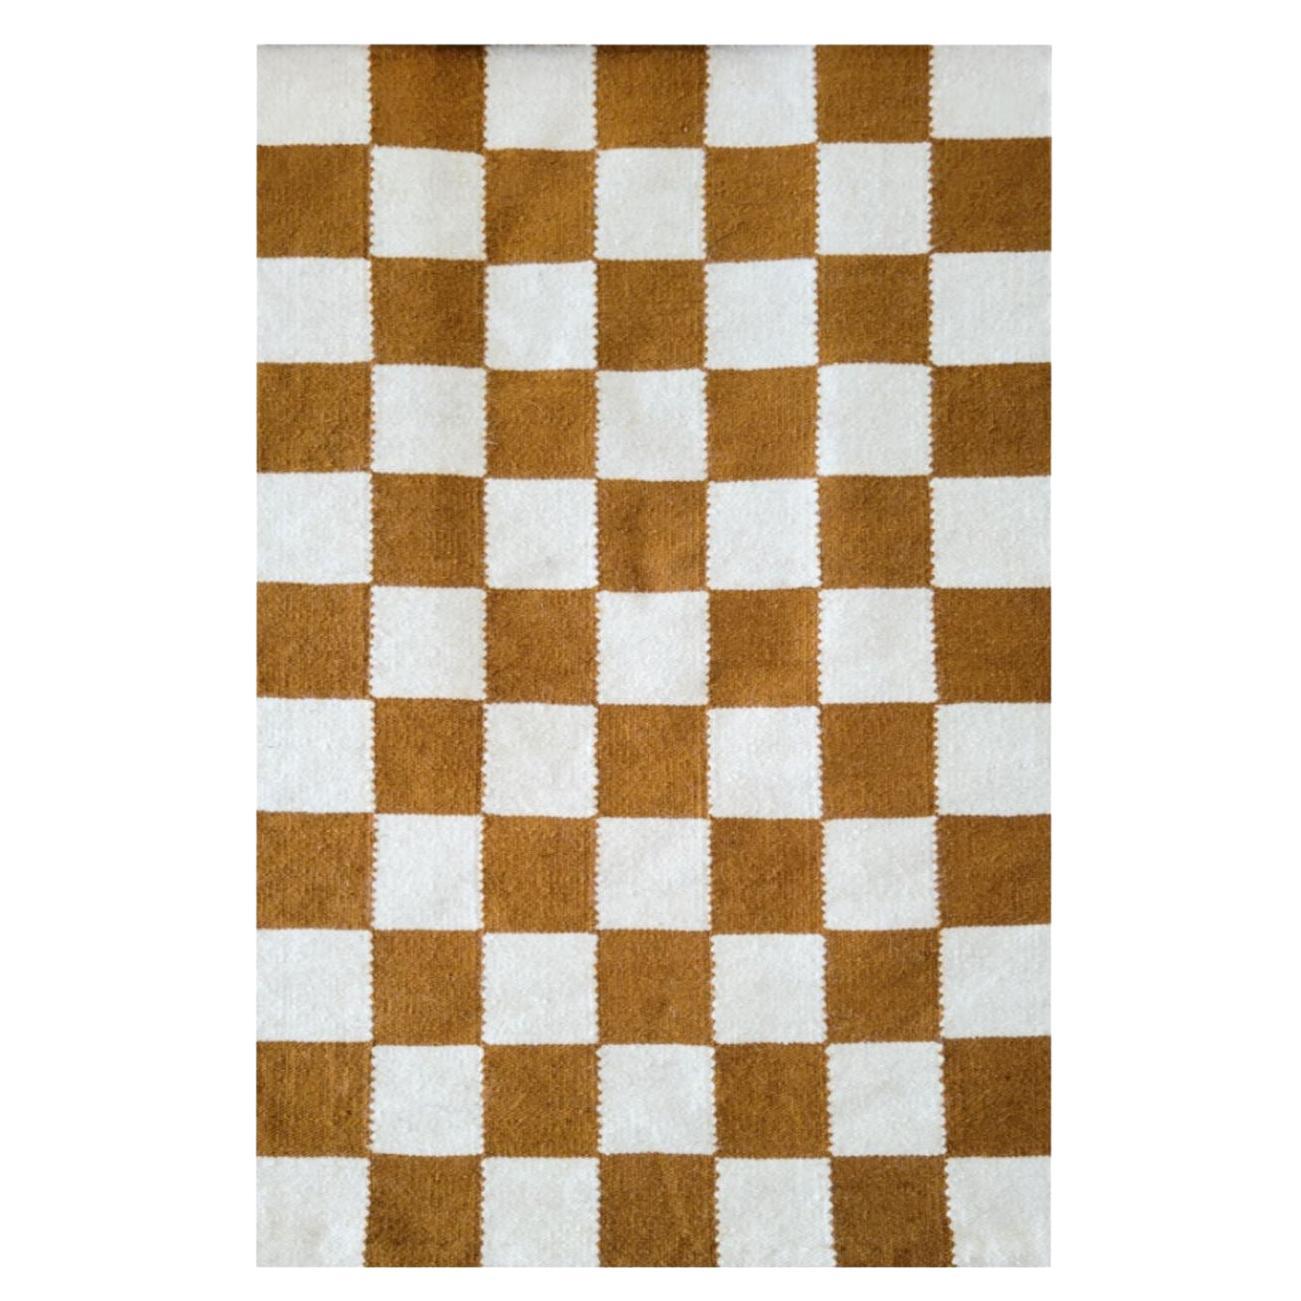 Rustic Checkered Handwoven Wool Area Rug